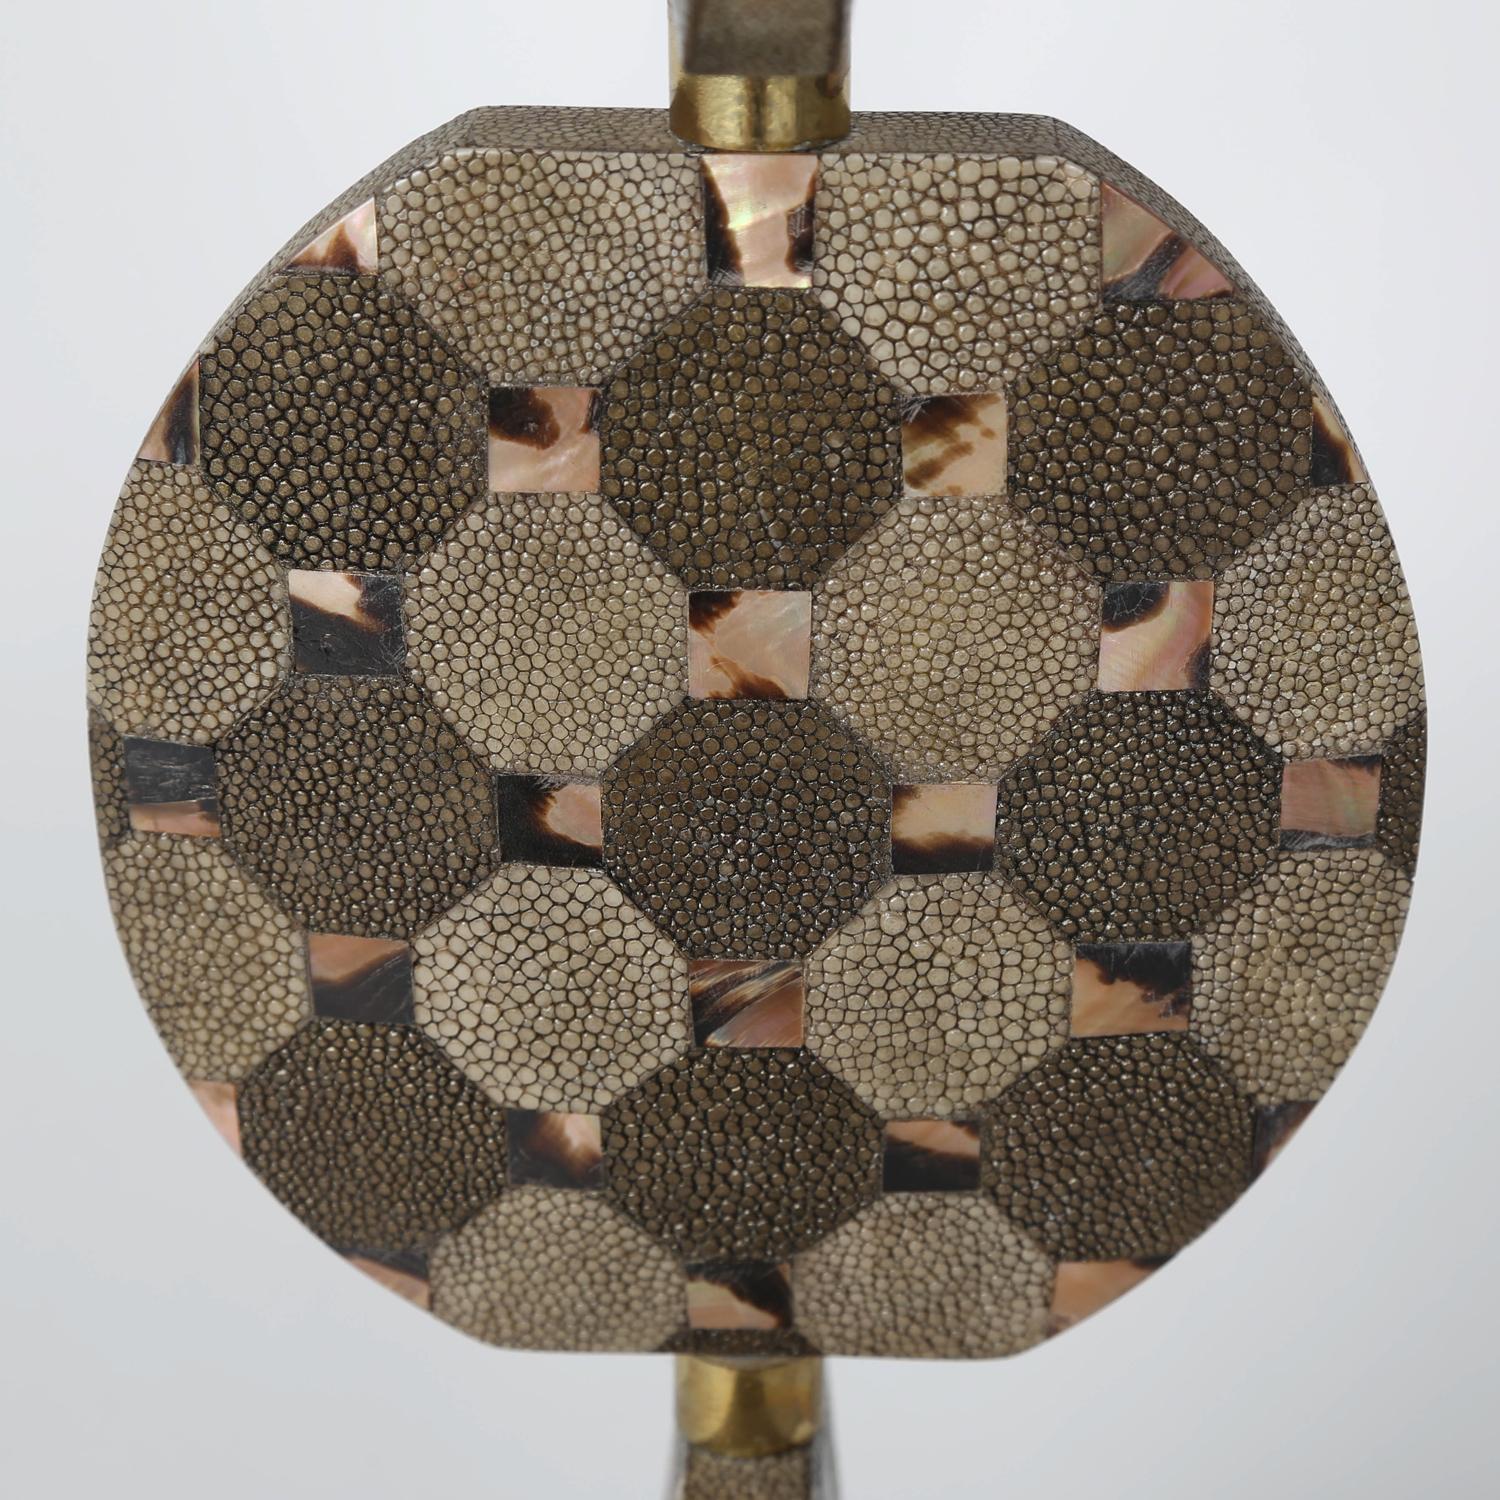 Hand-Crafted Sculptural Table Lamp in Shagreen and Horn with Brass Fittings, 1980s For Sale